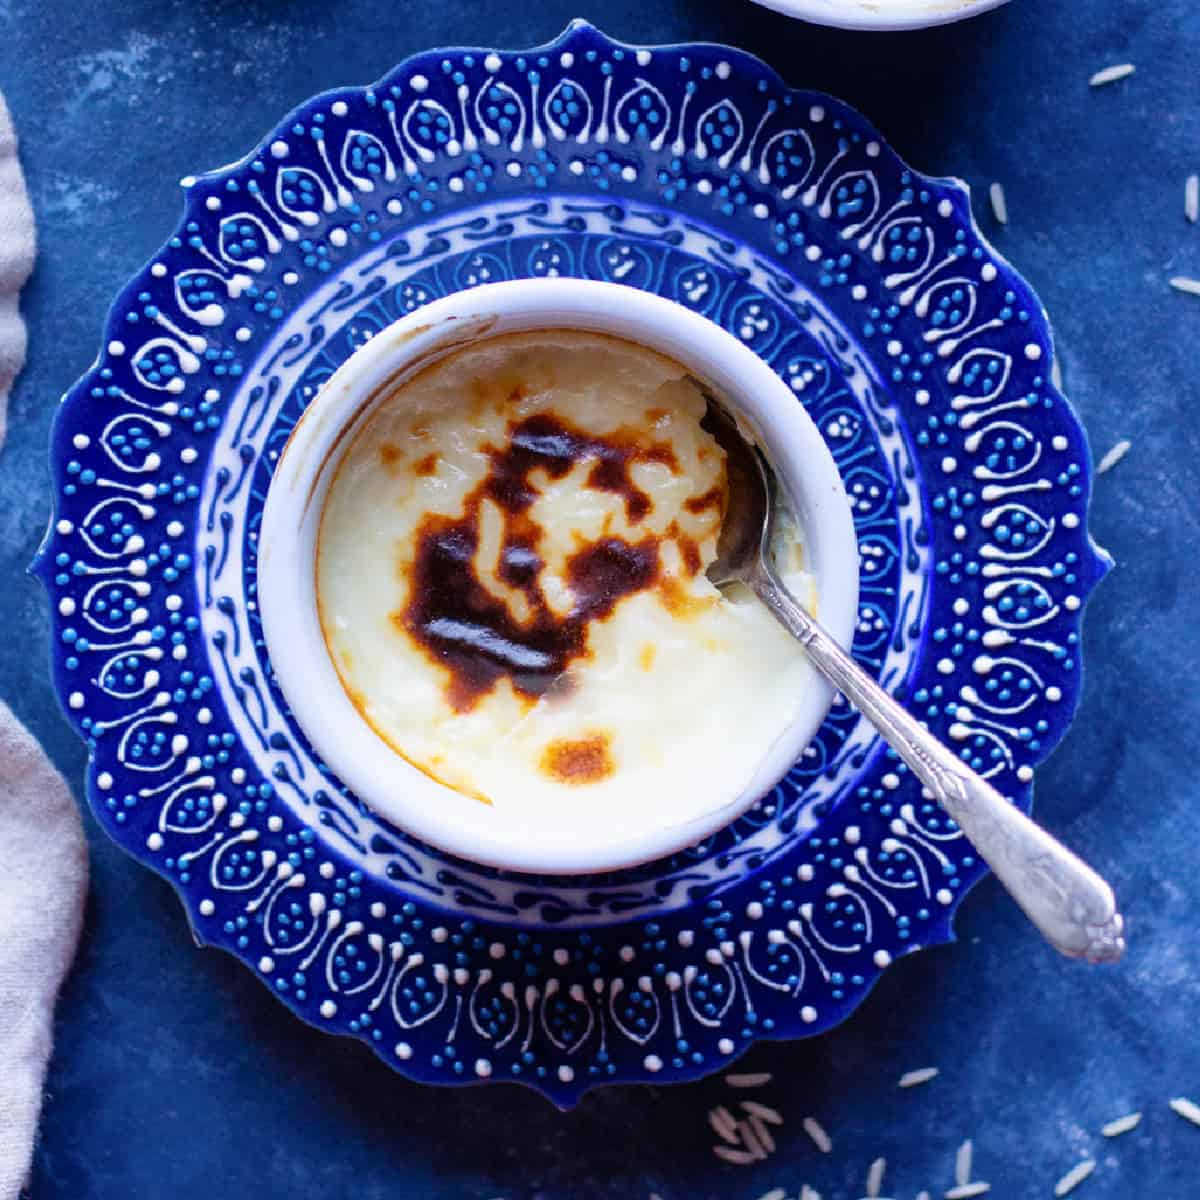 If you love light and creamy desserts, Sutlac, also known as Turkish rice pudding recipe is it. Creamy and rich with a golden top, this baked rice pudding is also gluten-free. Learn how to make this tasty dessert with this tutorial and step-by-step photos. 
